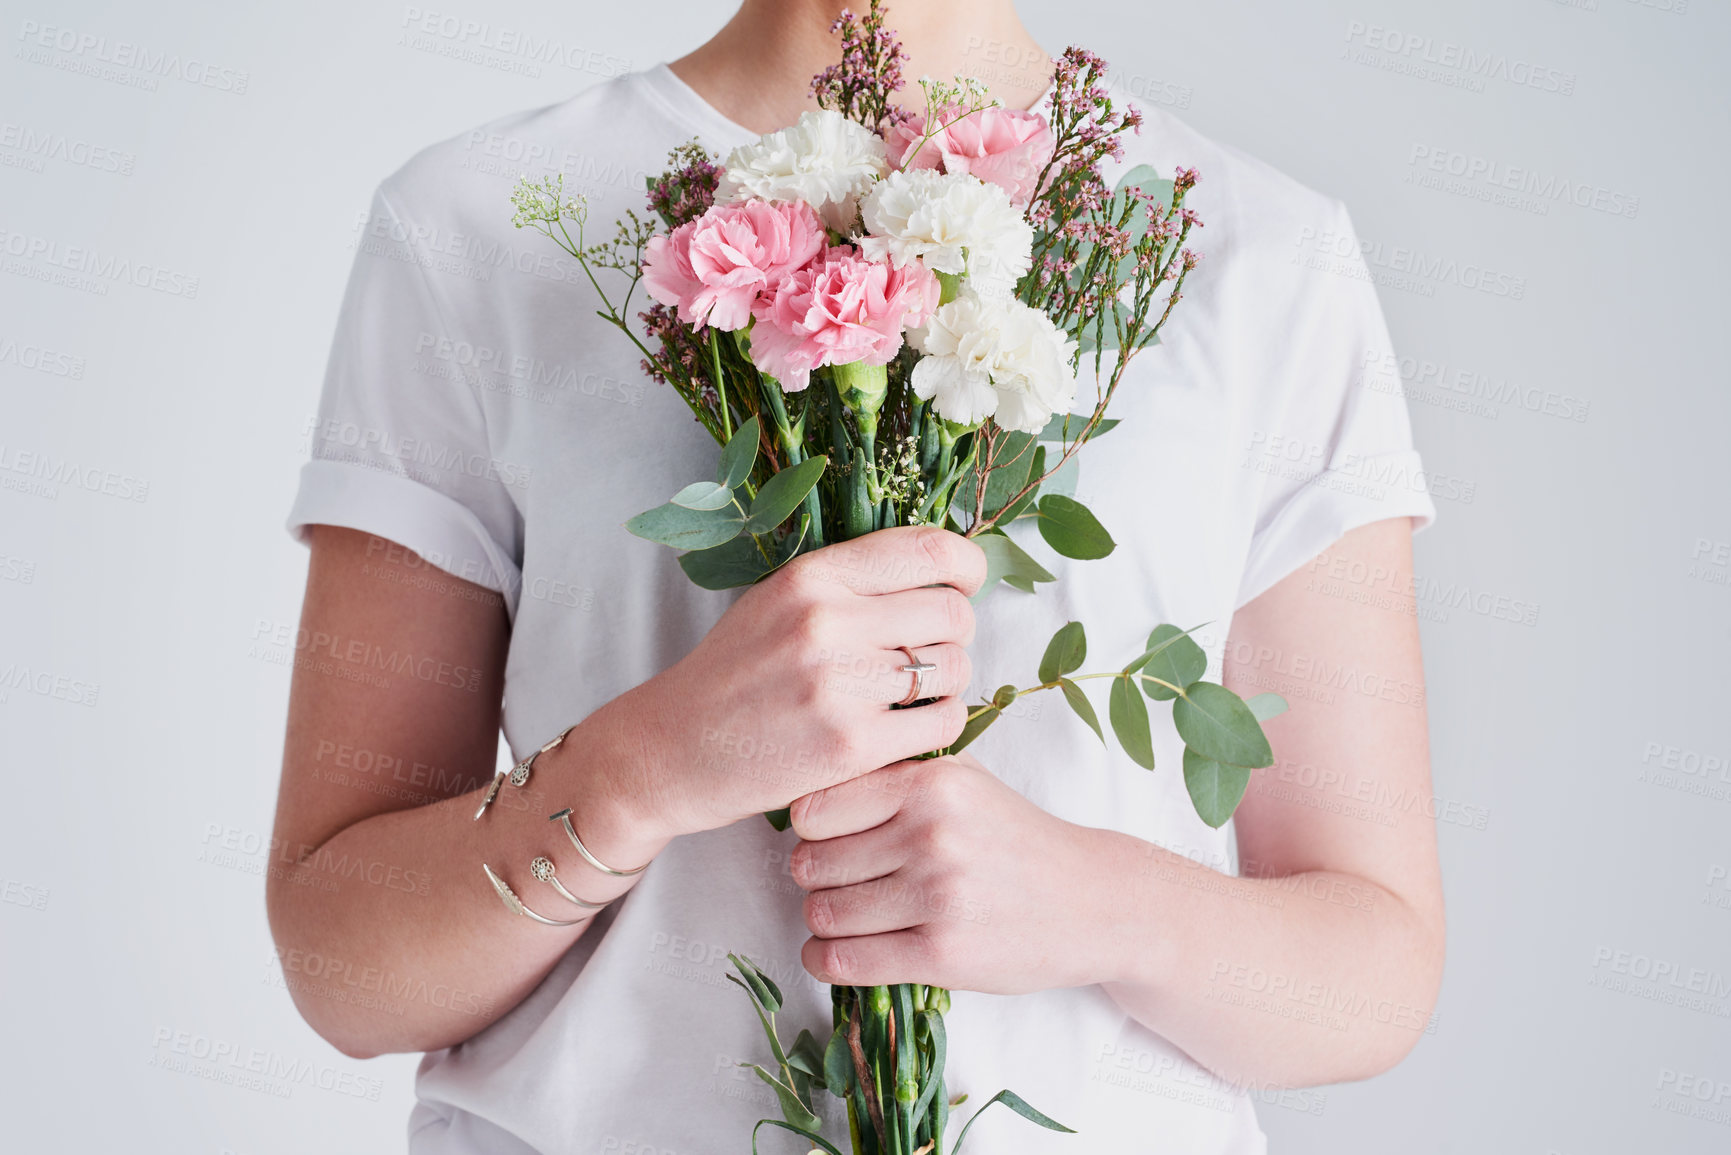 Buy stock photo Studio shot of an unrecognizable woman holding a bunch of flowers against a grey background